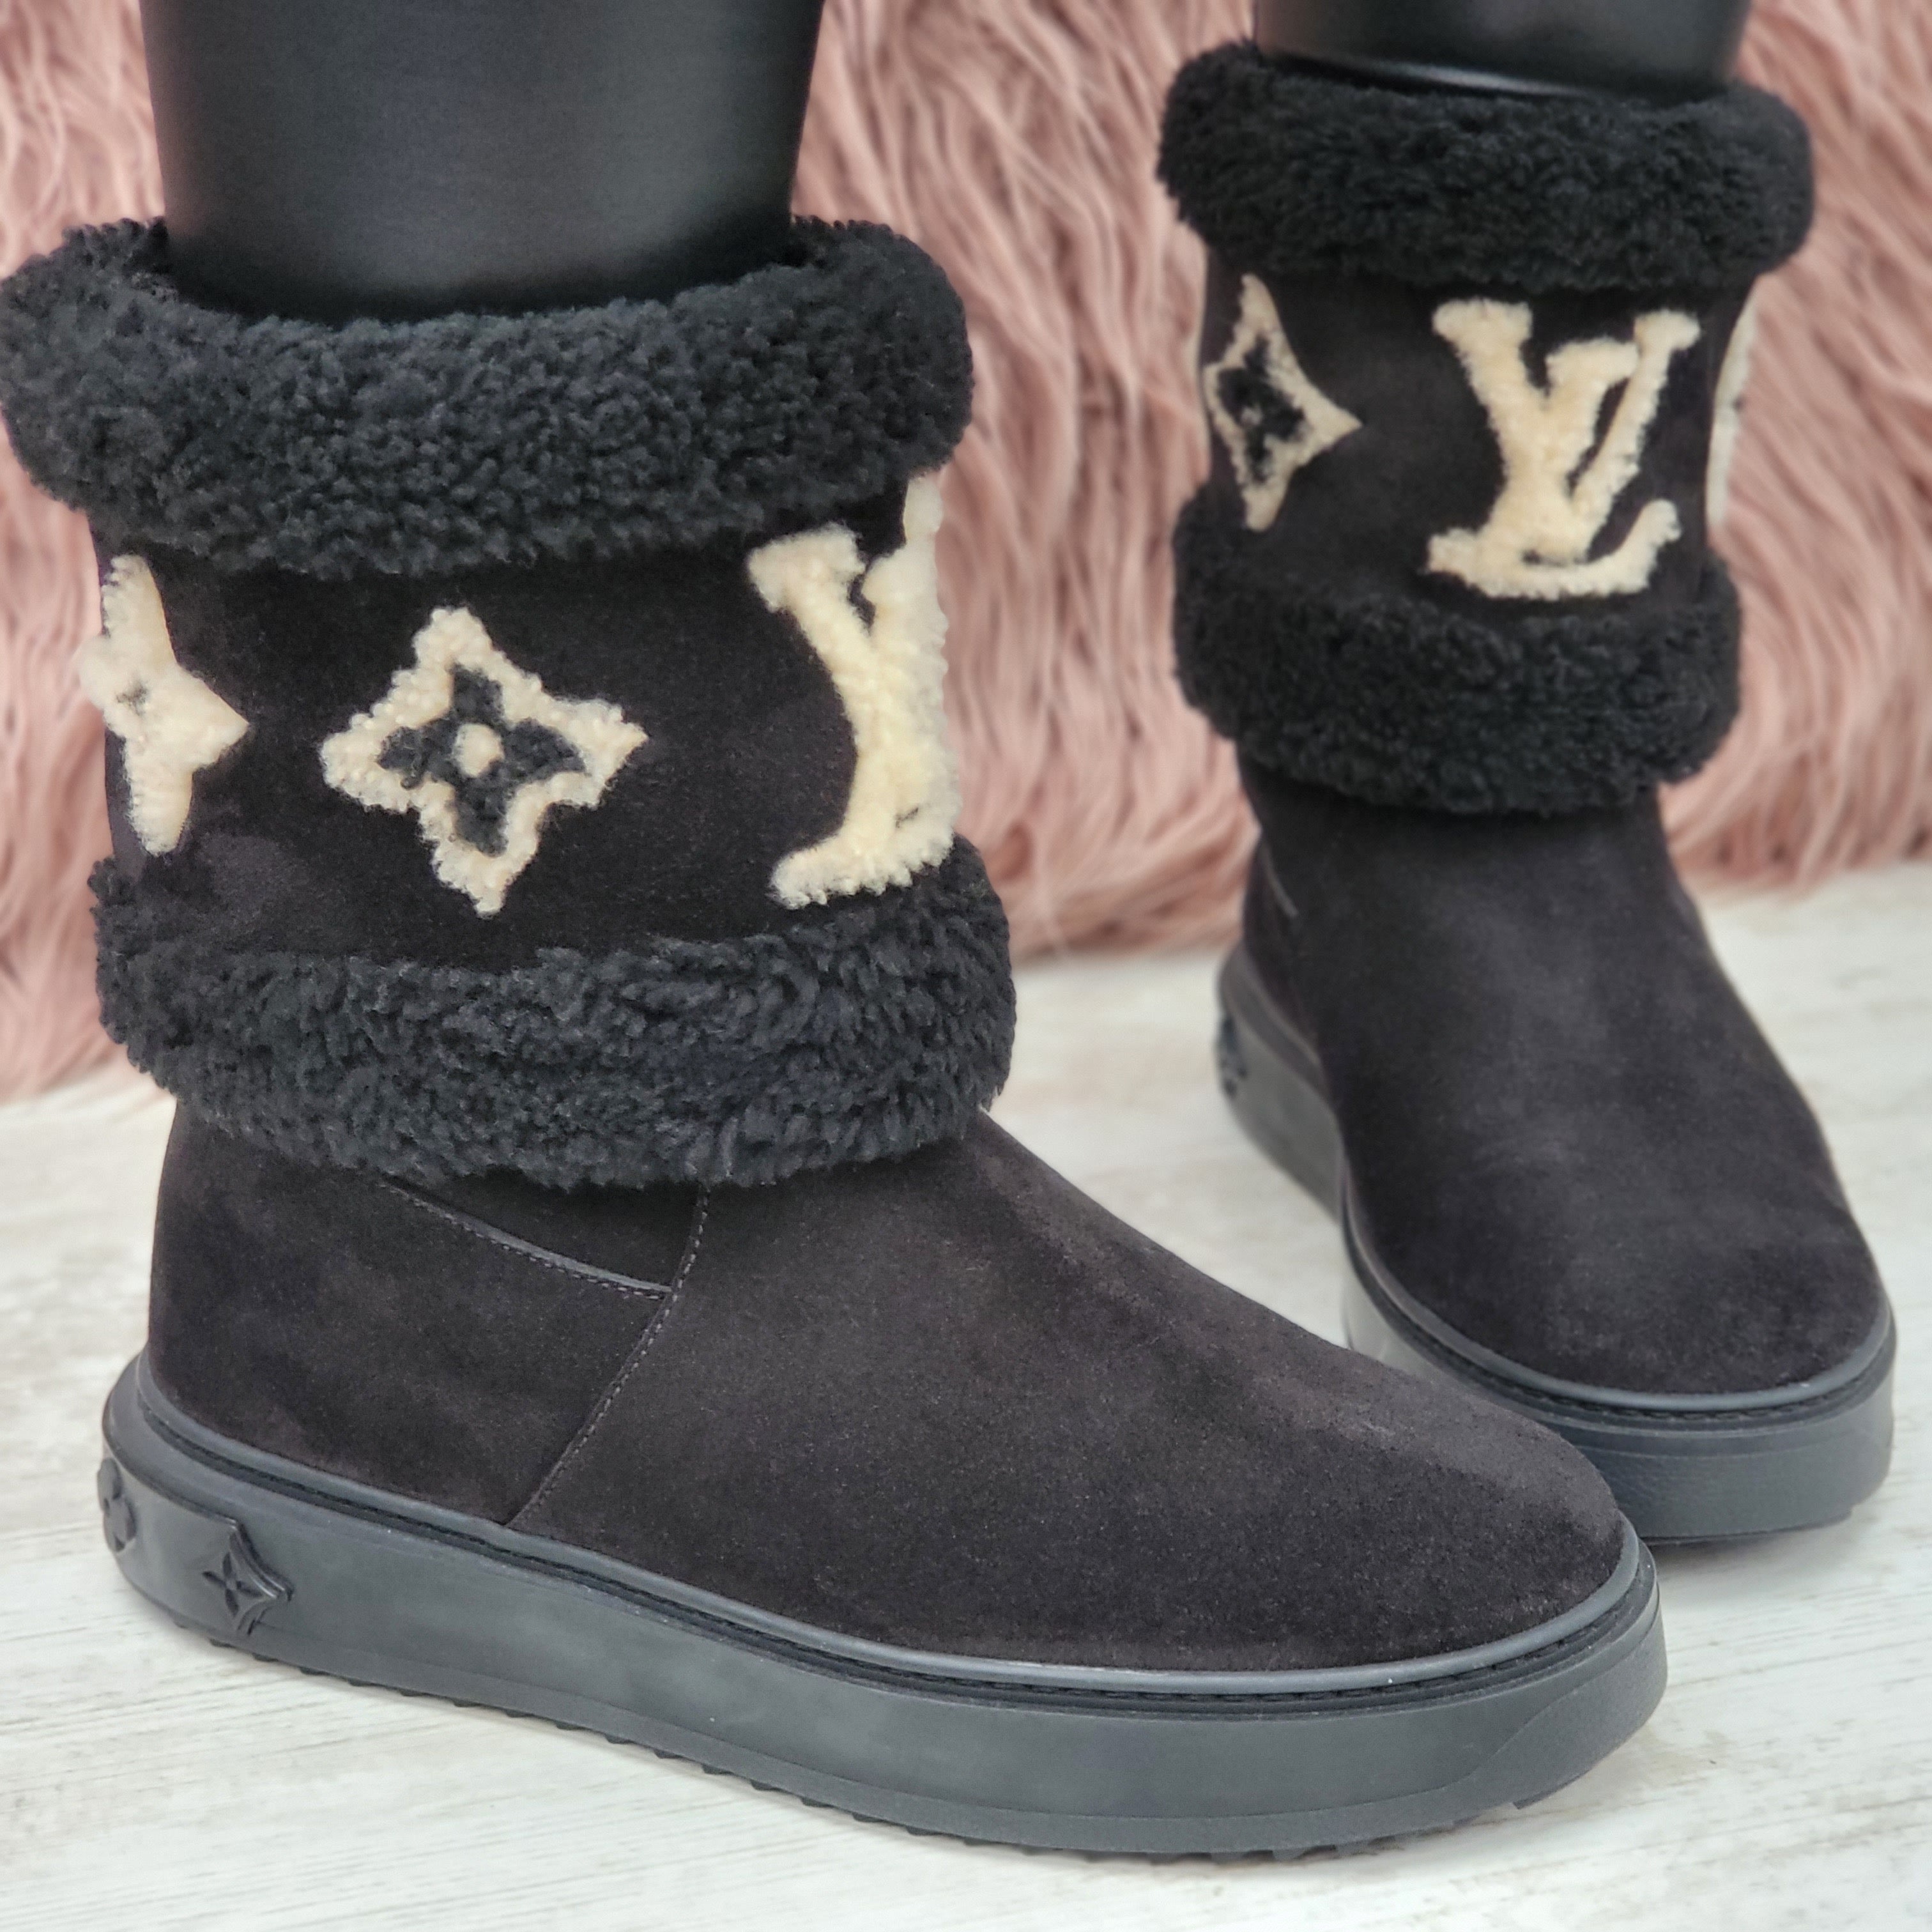 New Louis Vuitton Beige & Pink Snowdrop Shearling Boots 36.5 6.5